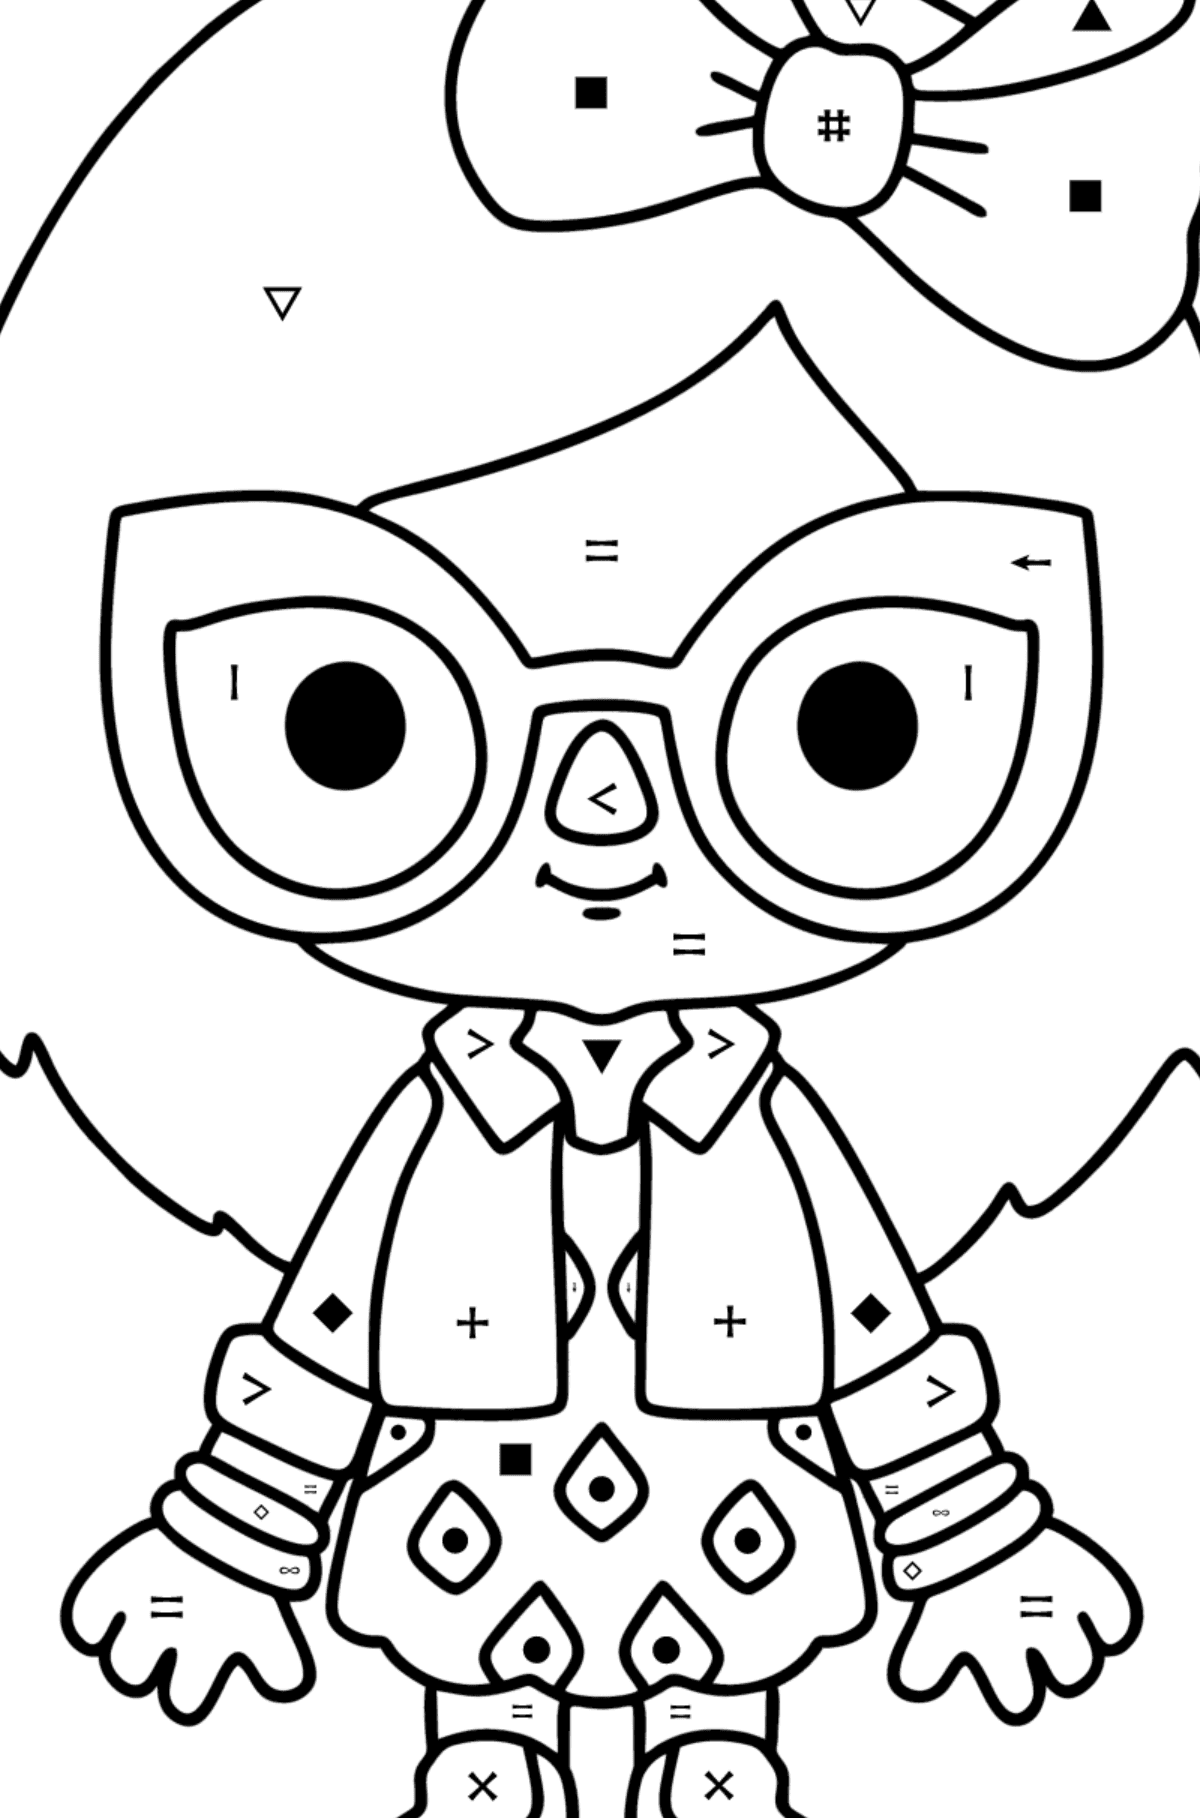 Colouring page Girl tocaboca 01 - Coloring by Symbols for Kids